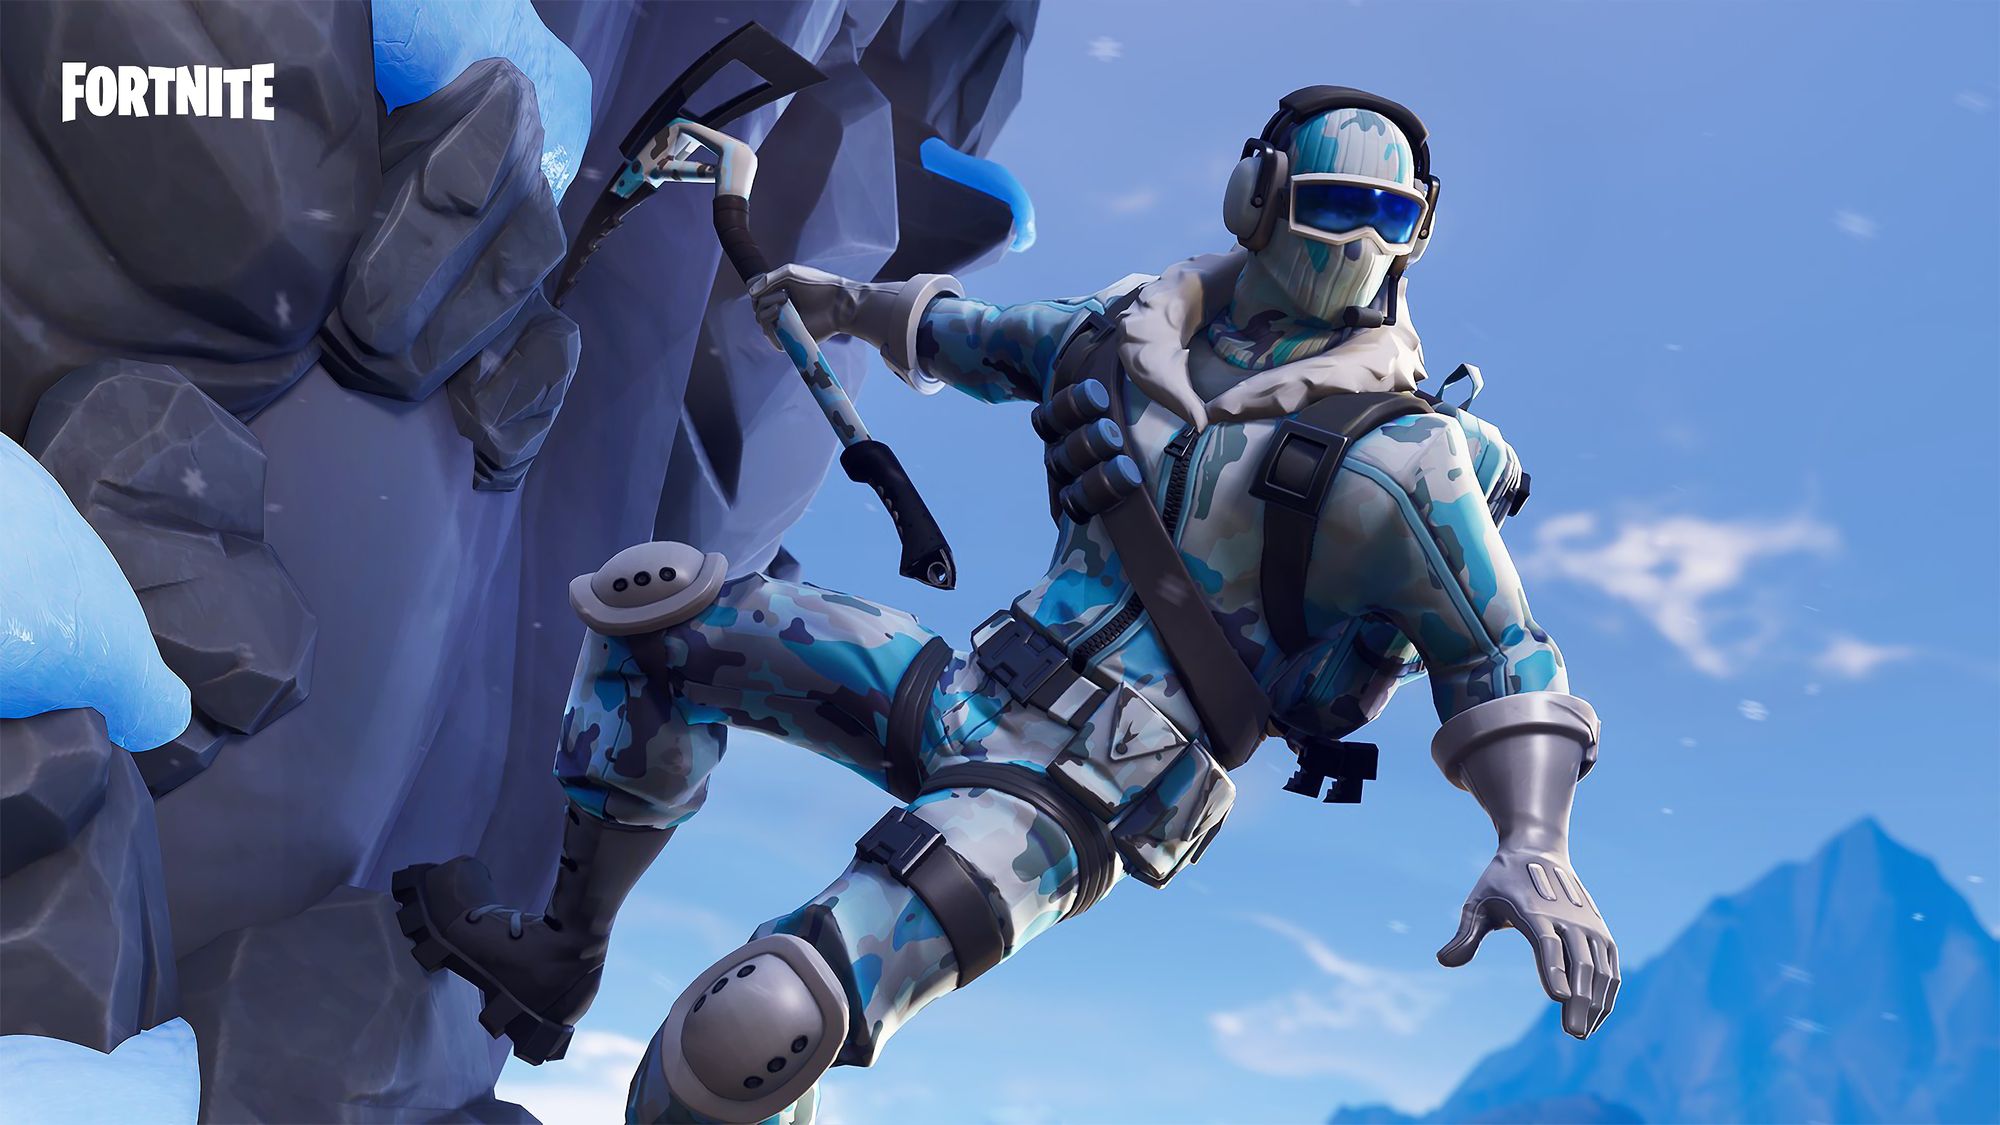 Fortnite Update v7.20 Planned for "Tuesday or Wednesday" Next Week